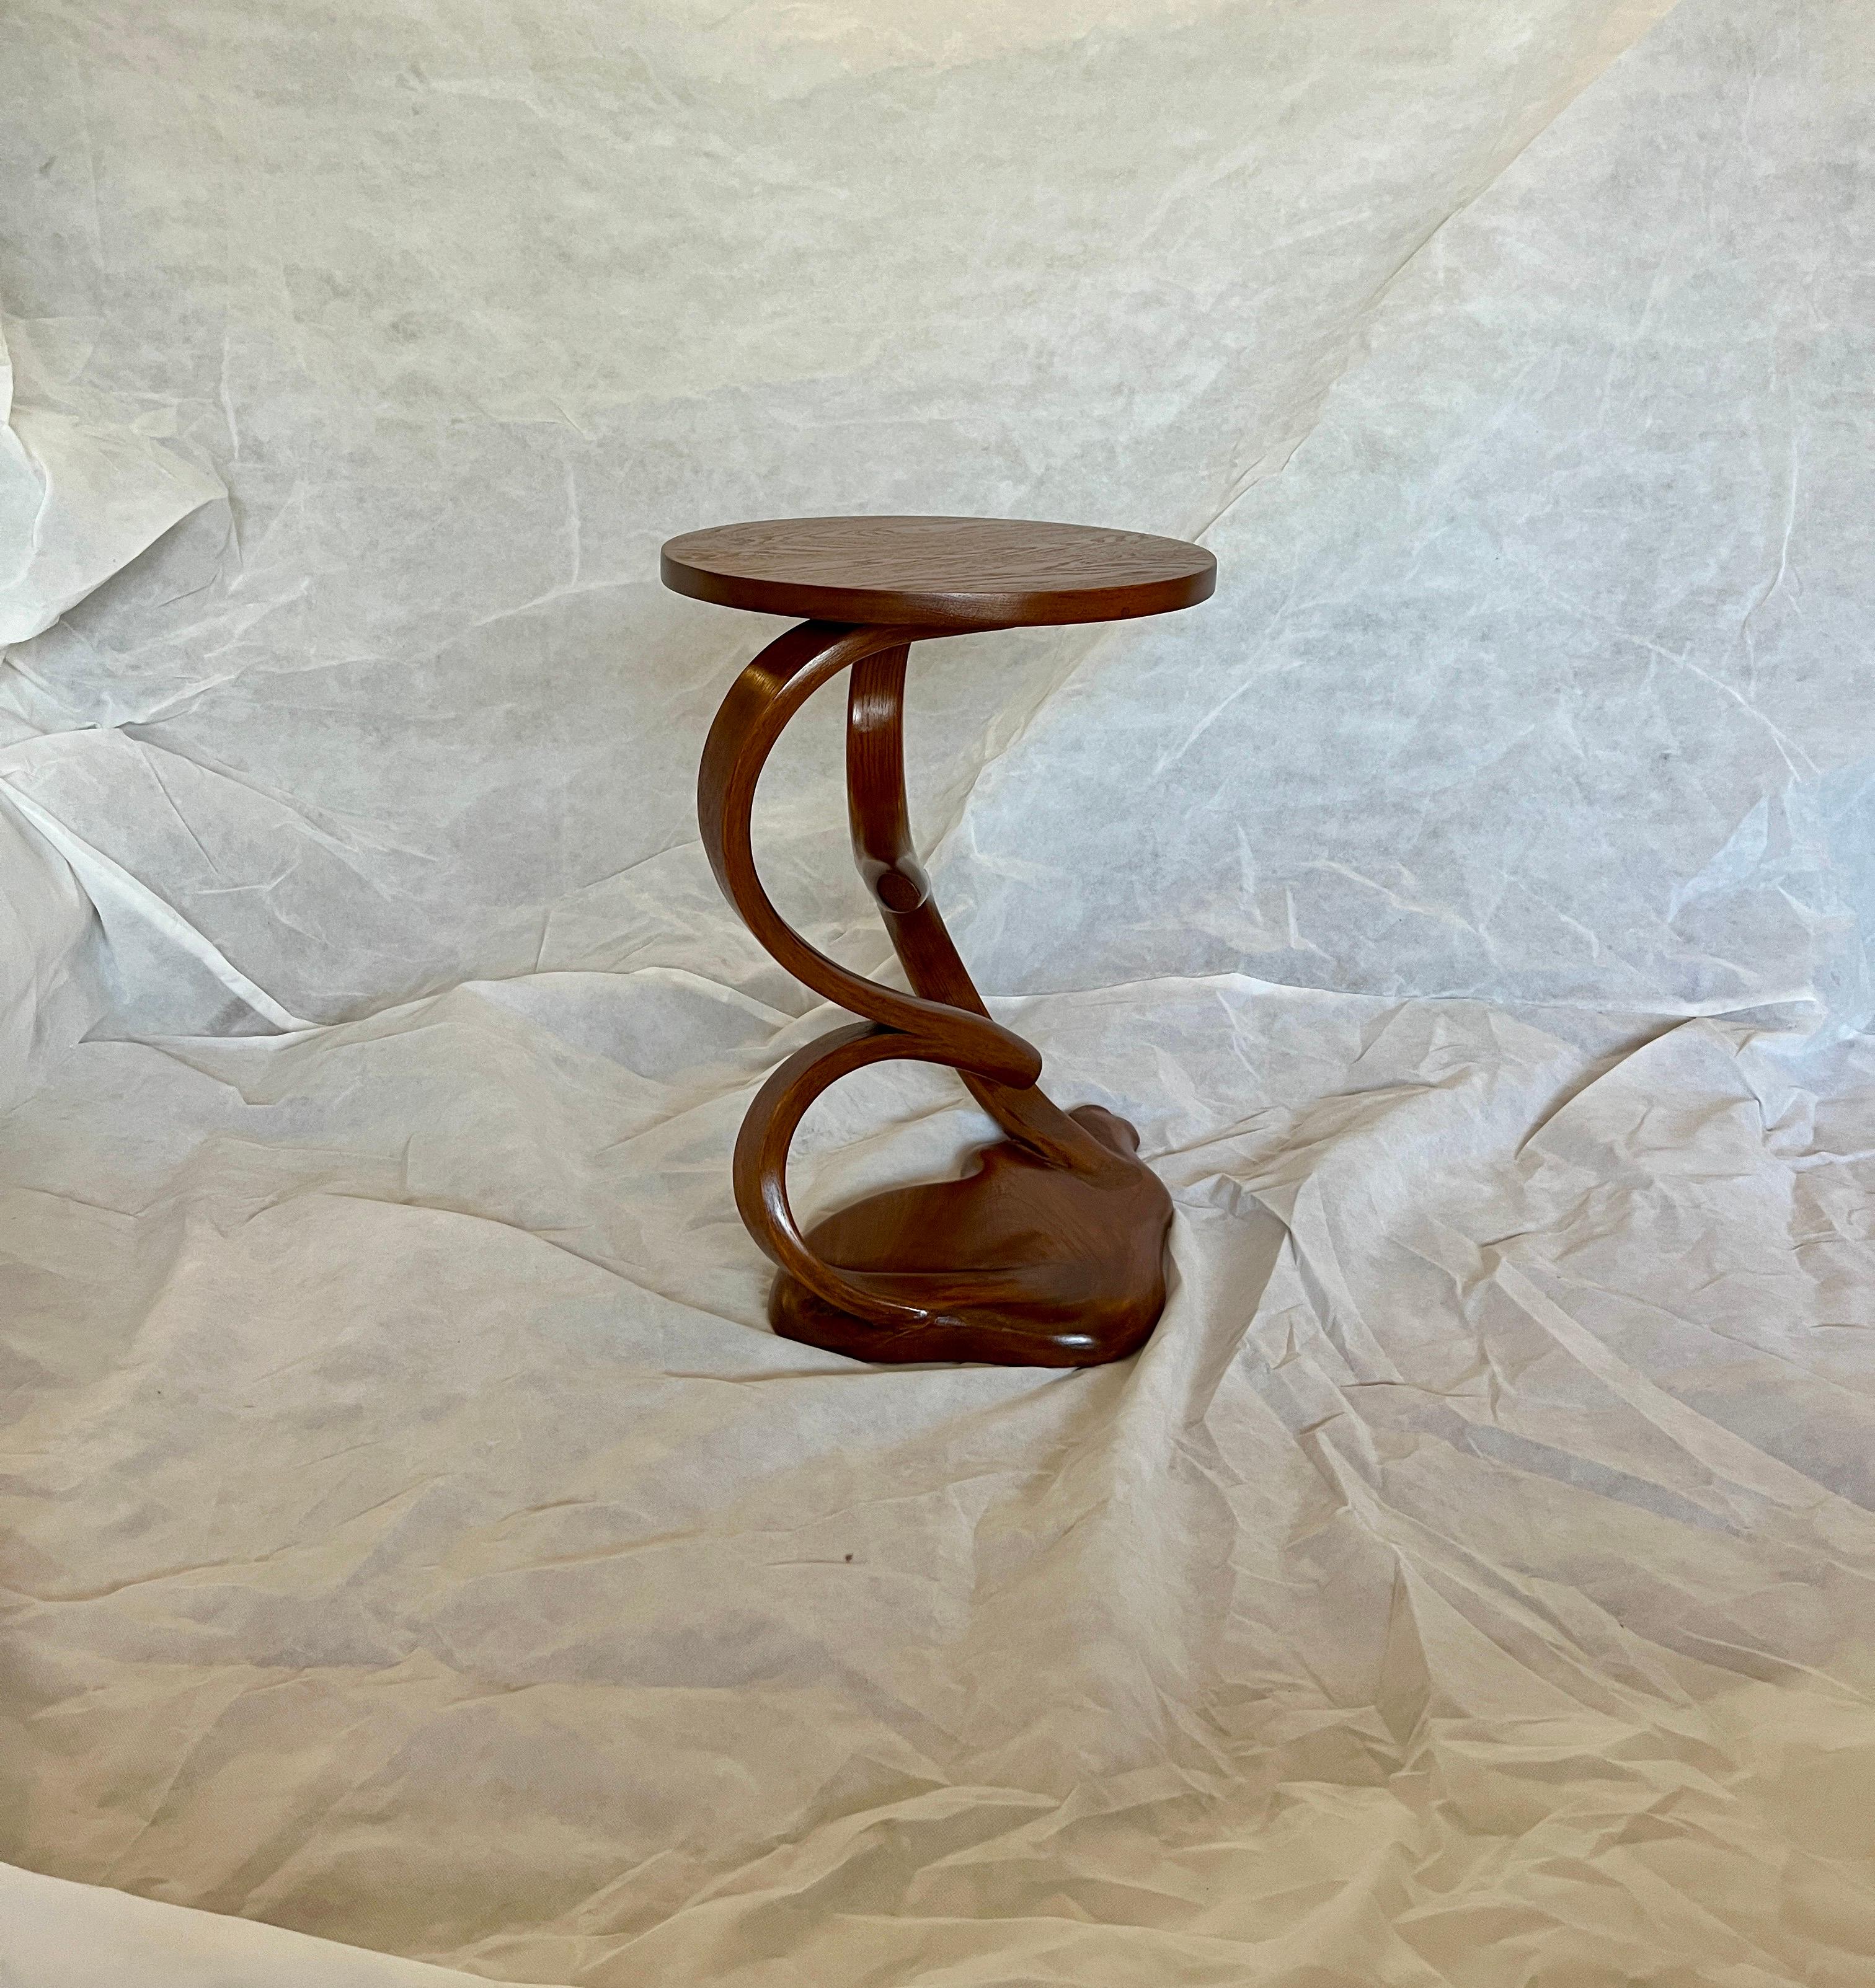 This piece's main element is bentwood's organic motion between the top and the base. The proportions of the top and the base are made to enhance the centre design of the piece. The piece can be placed in a modern style interior setting and will also